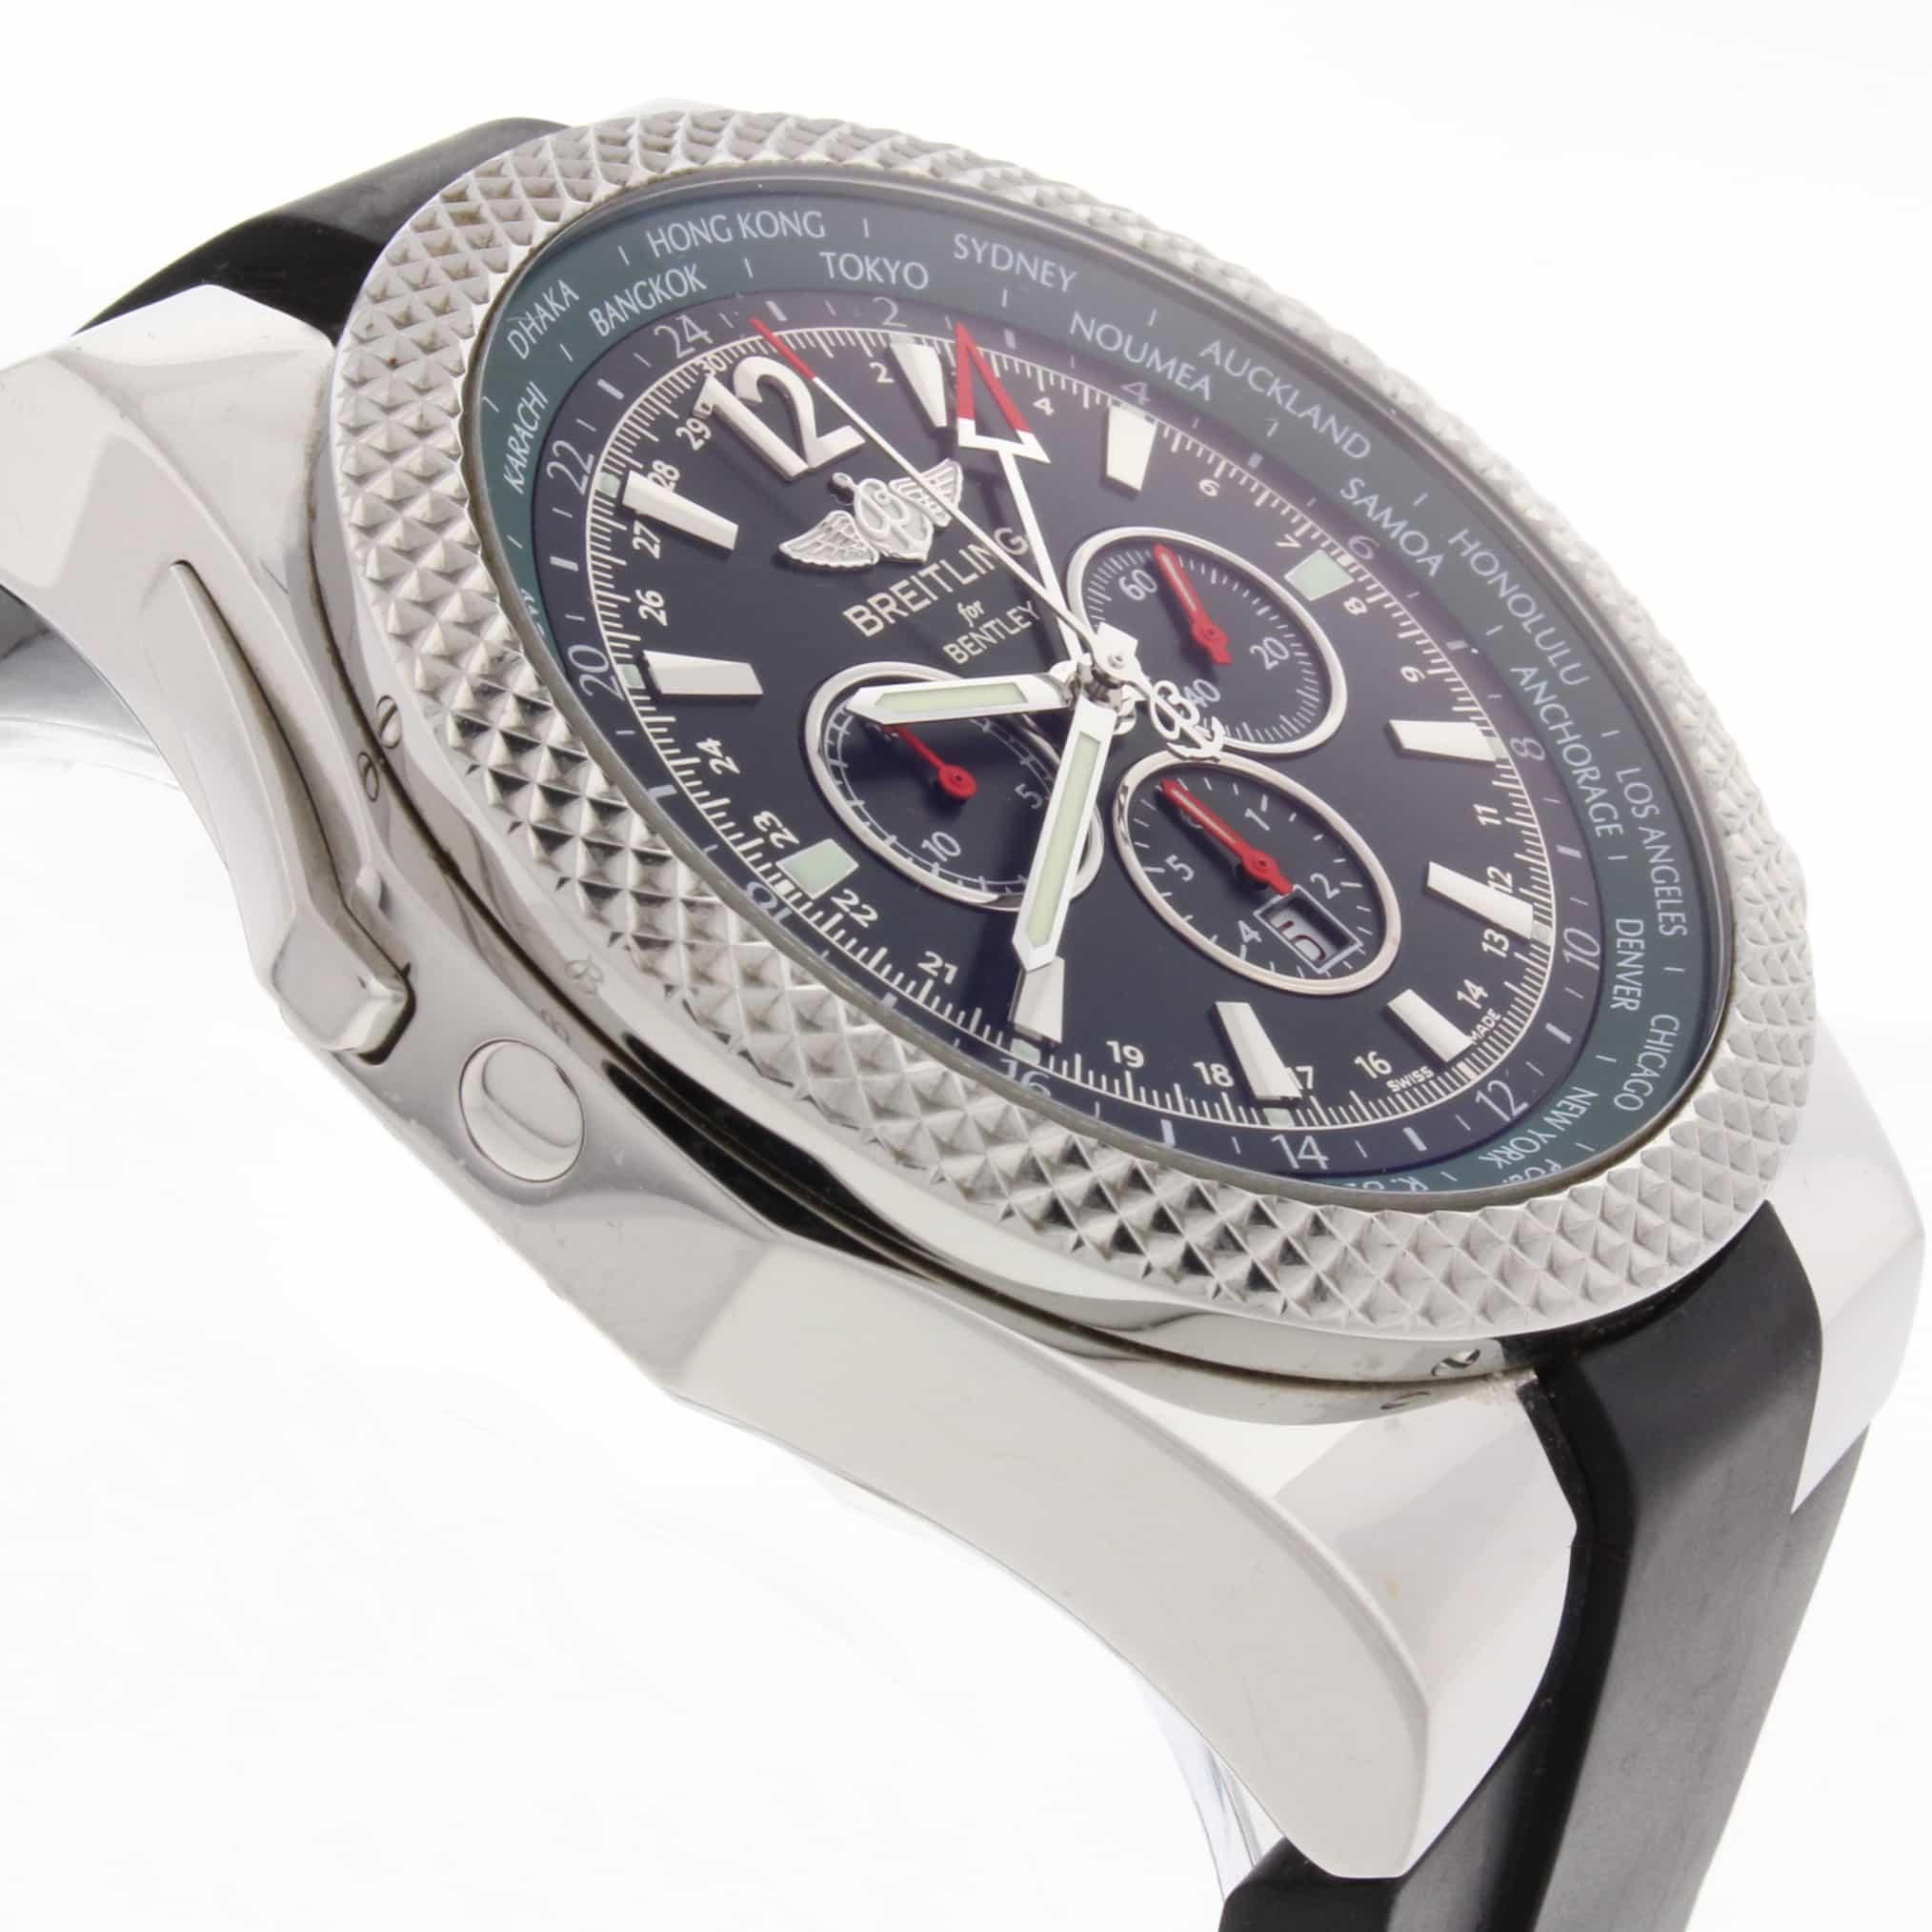 Breitling Bentley Motors Limited Edition Chronograph Automatic Watch In Excellent Condition For Sale In New York, NY